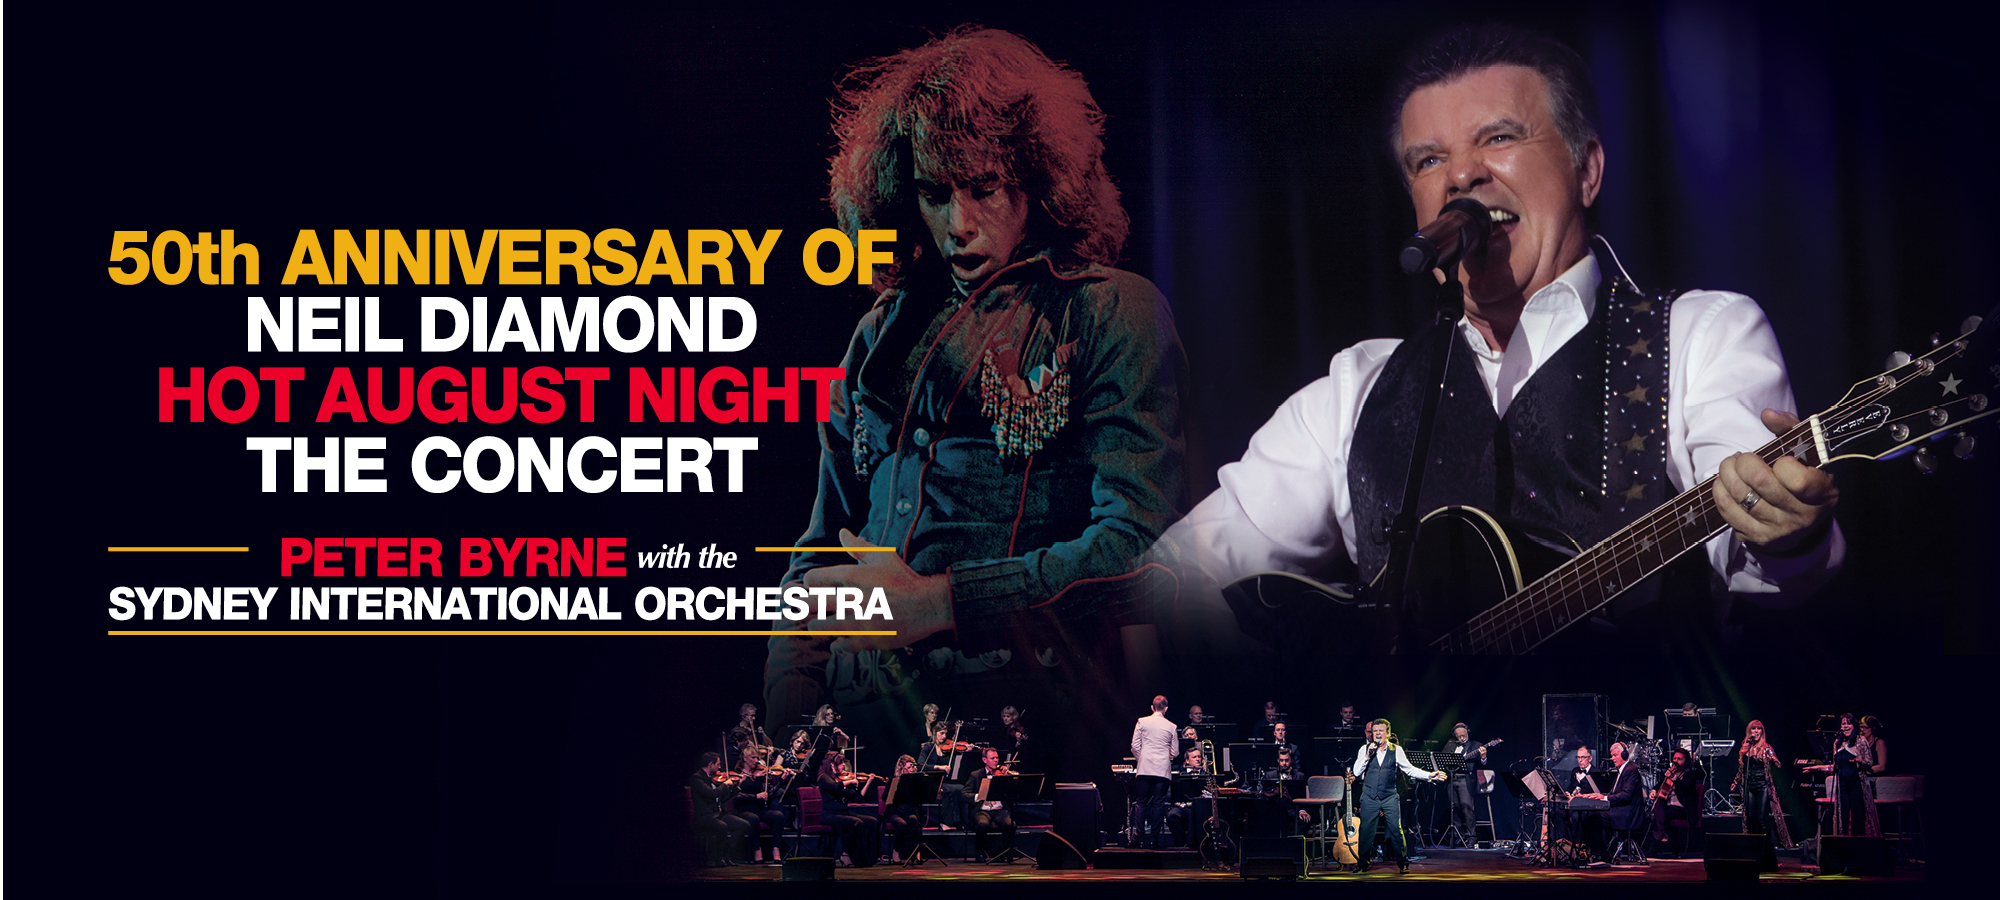 50th Anniversary of Neil Diamond Hot August Night The Concert